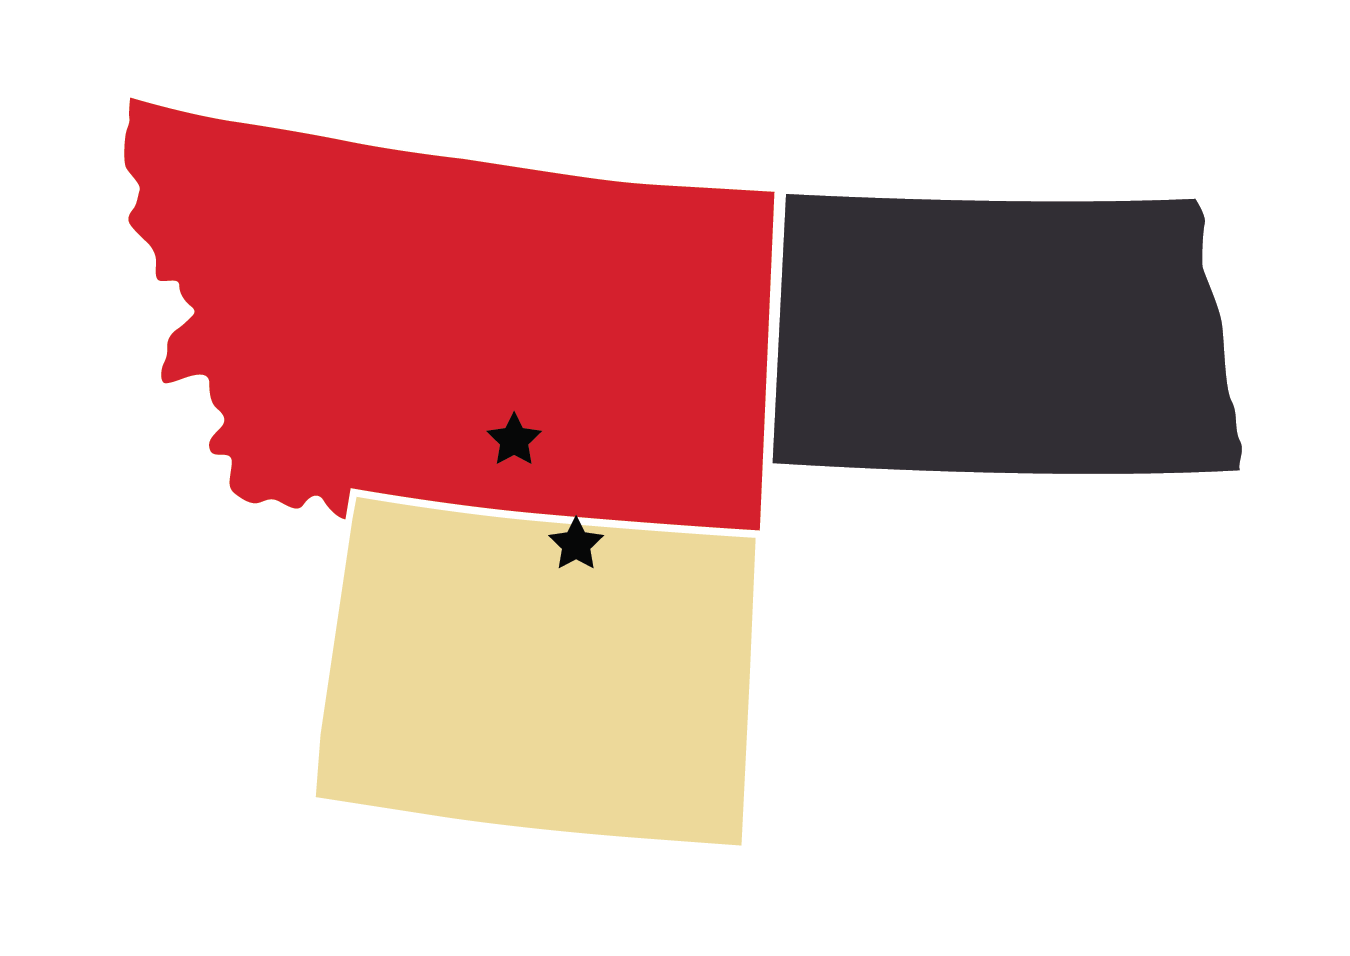 Map showing Sign Product locations in Billings, Montana, and Sheridan, Wyoming.